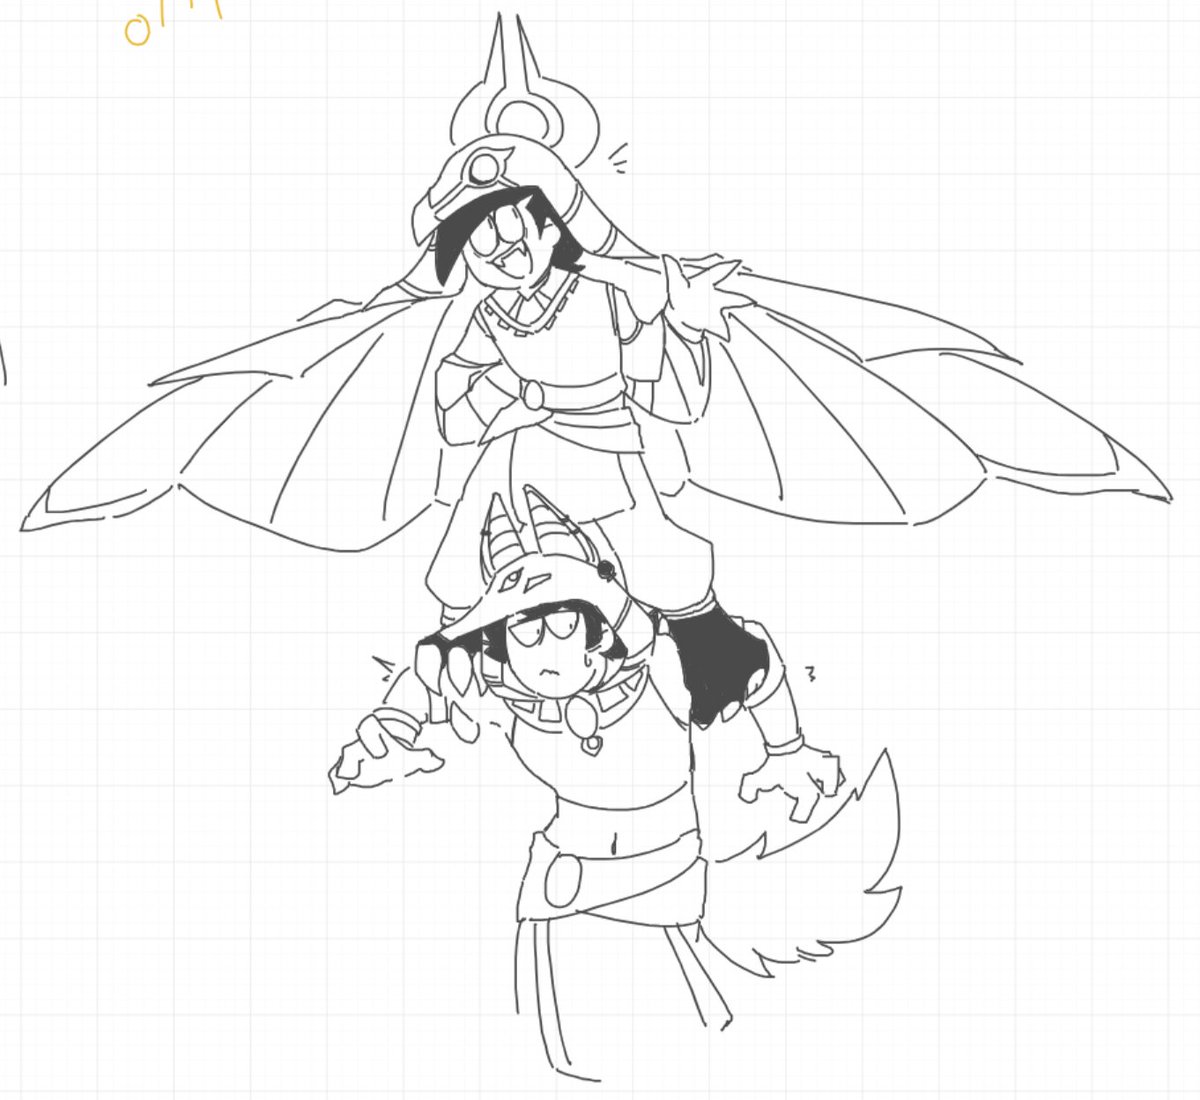 ohh btw also doodle this xd Streber just wanted to take him flying

#SpookyMonthAU #spookymonth